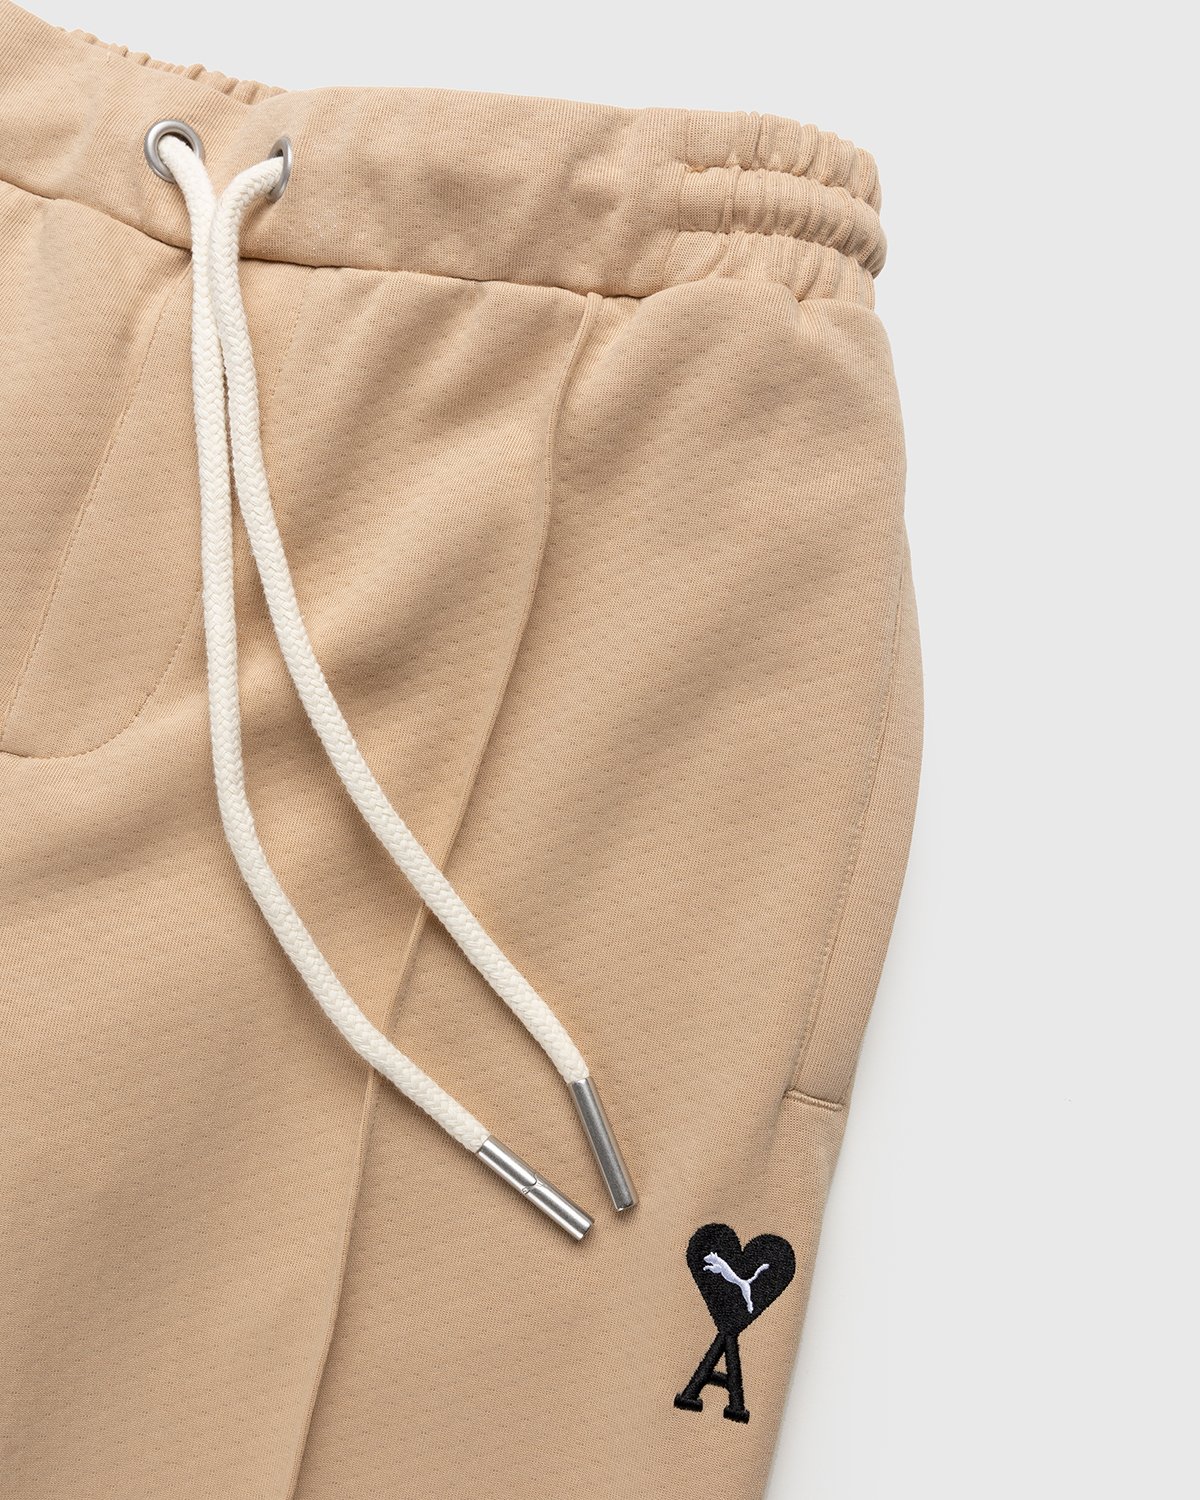 Puma x AMI - Wide Logo Pants Ginger Root - Clothing - Beige - Image 4